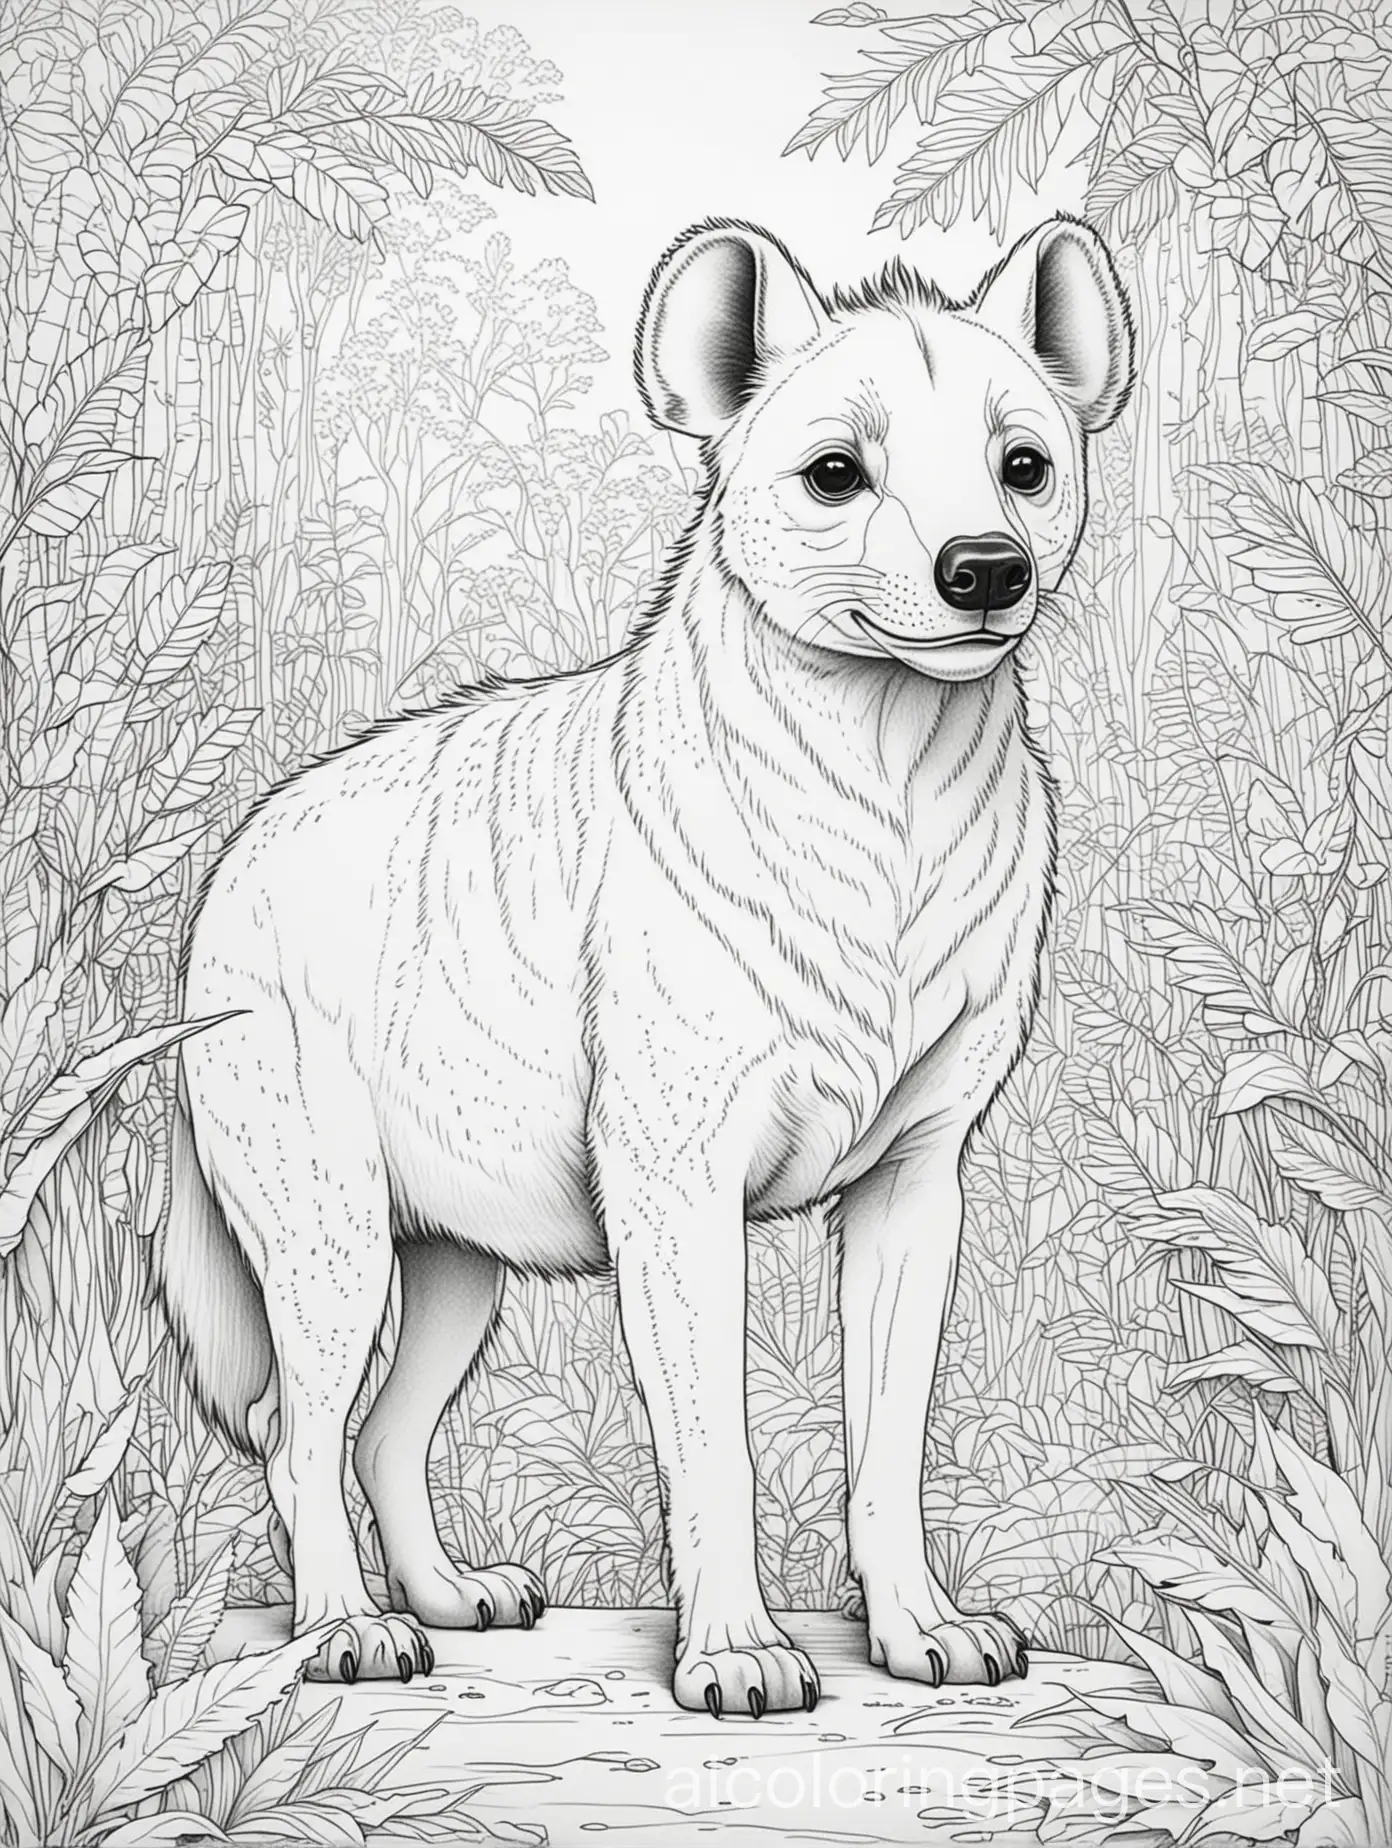 Hyena in a jungle , Coloring Page, black and white, line art, white background, Simplicity, Ample White Space. The background of the coloring page is plain white to make it easy for young children to color within the lines. The outlines of all the subjects are easy to distinguish, making it simple for kids to color without too much difficulty, Coloring Page, black and white, line art, white background, Simplicity, Ample White Space. The background of the coloring page is plain white to make it easy for young children to color within the lines. The outlines of all the subjects are easy to distinguish, making it simple for kids to color without too much difficulty